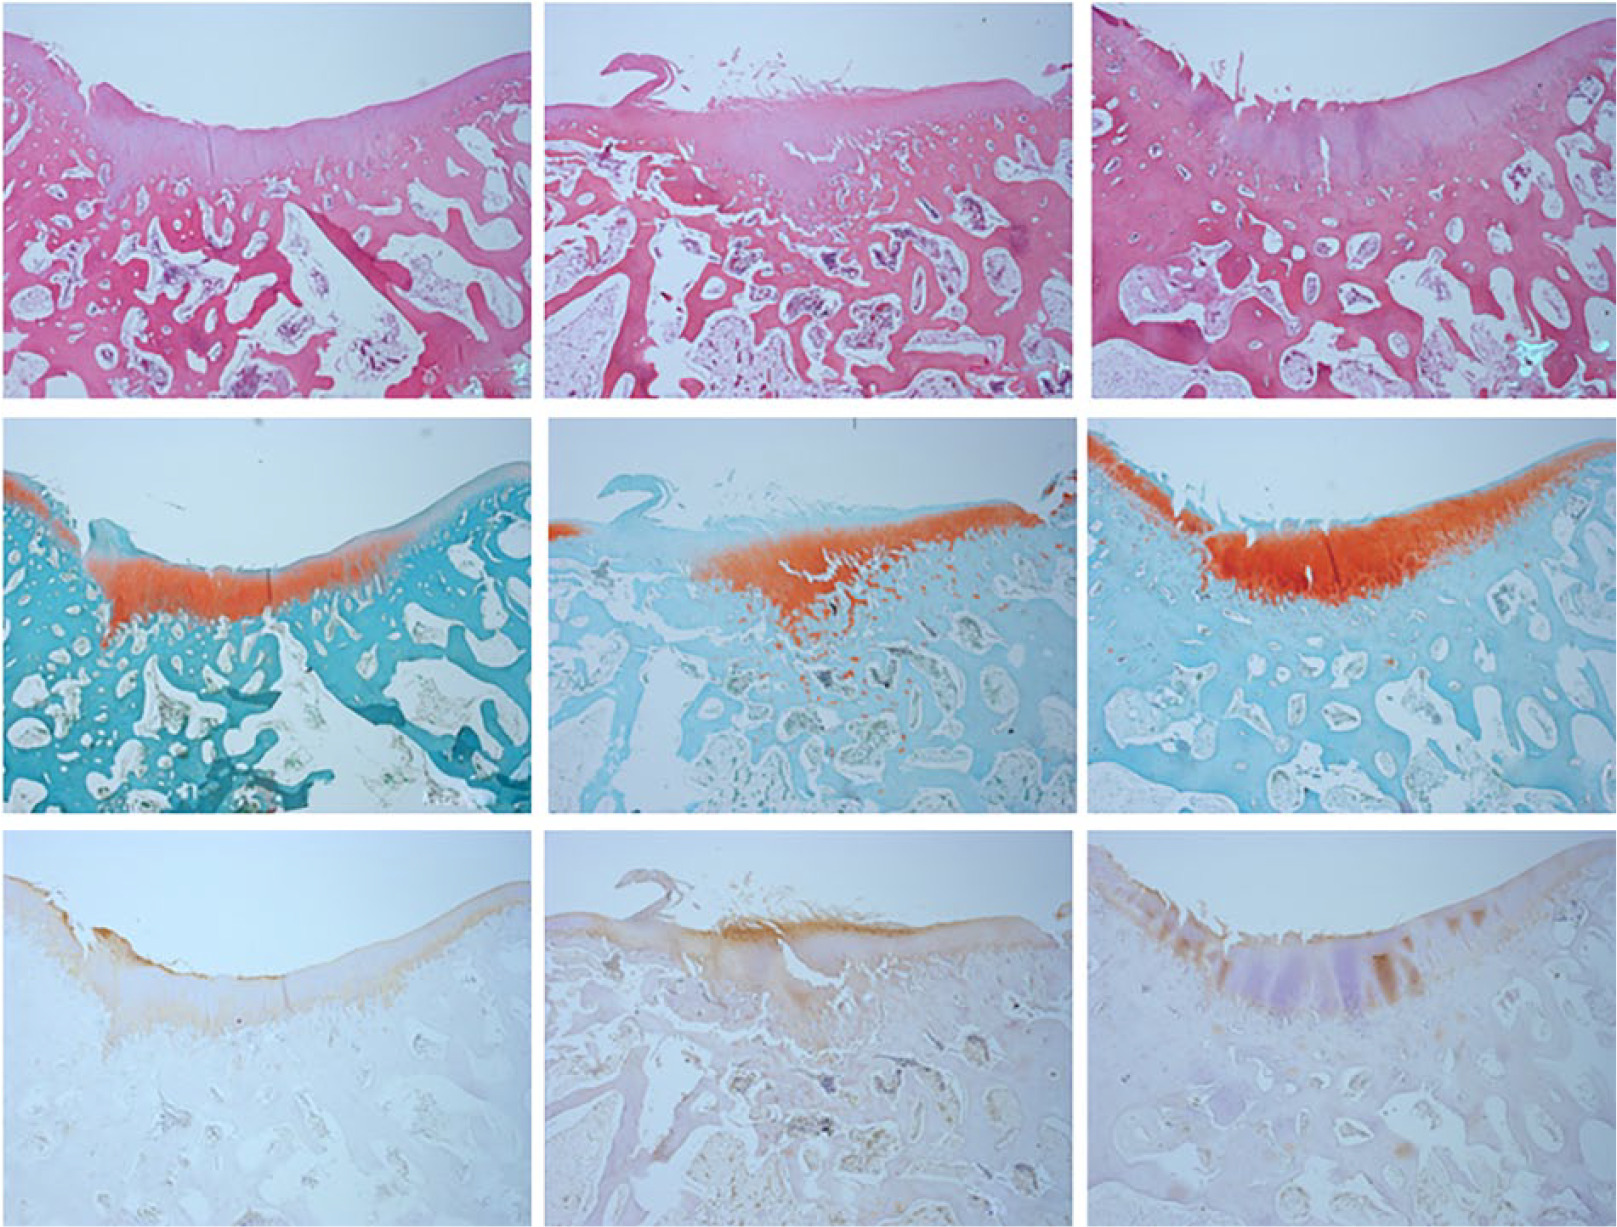 Fig 7 
            Microscopic findings at 12 weeks (×100). Top row: H&E staining; middle row: safranin O staining; bottom row: collagen type II staining. From left are microscopic findings from the control group, the low-dose group, and the high-dose group.
          